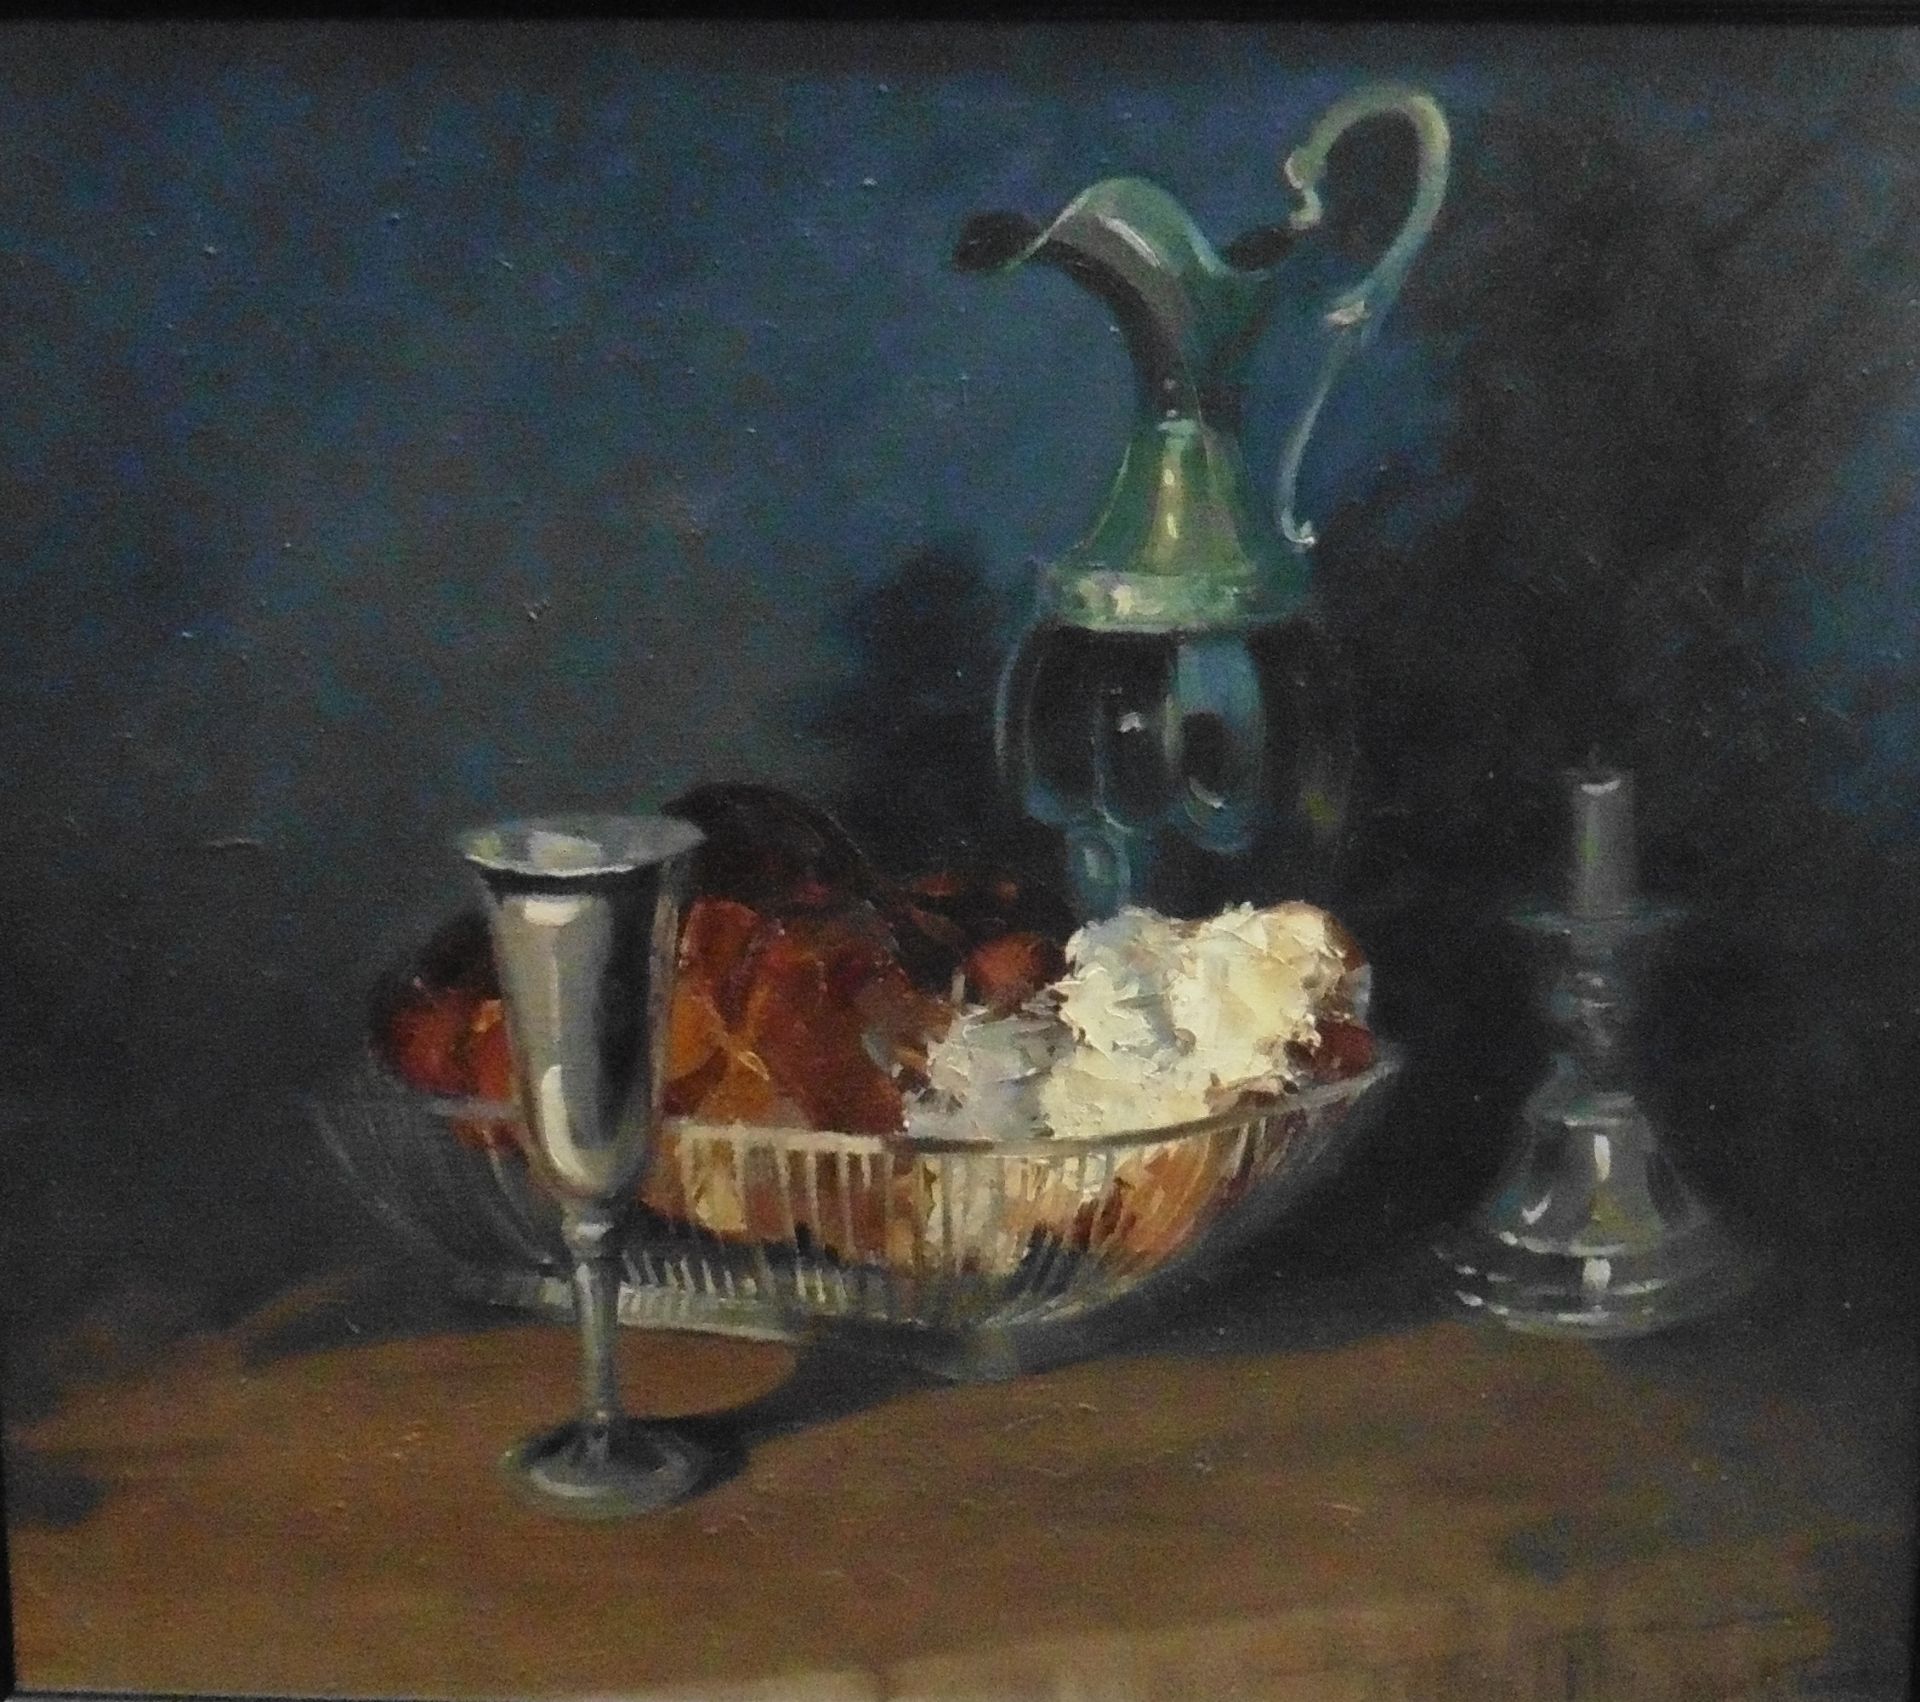 Bread and Pewter still life oil painting by Helen M Turner Bn 1937 PPAI, GSWA Exhib R.G.I - Image 2 of 5